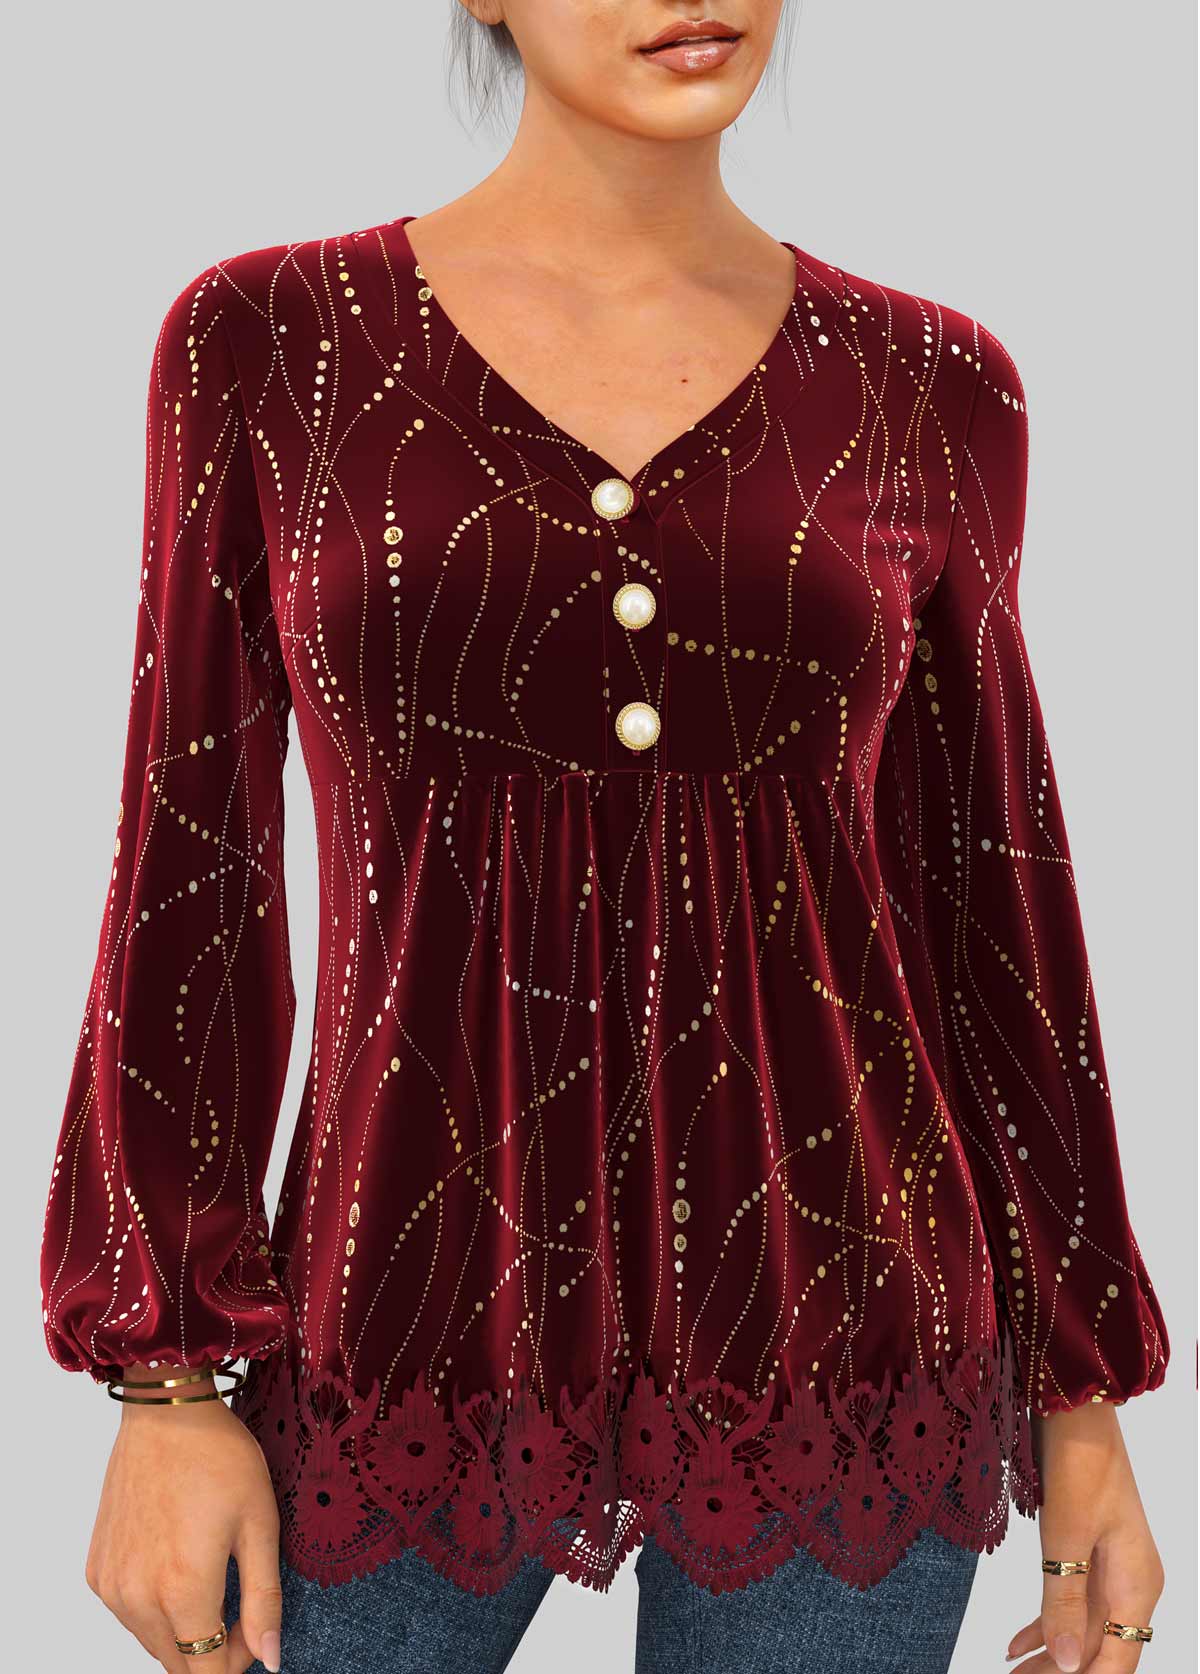 Hot Stamping Wine Red Velvet Stitching Blouse | modlily.com - USD 22.99